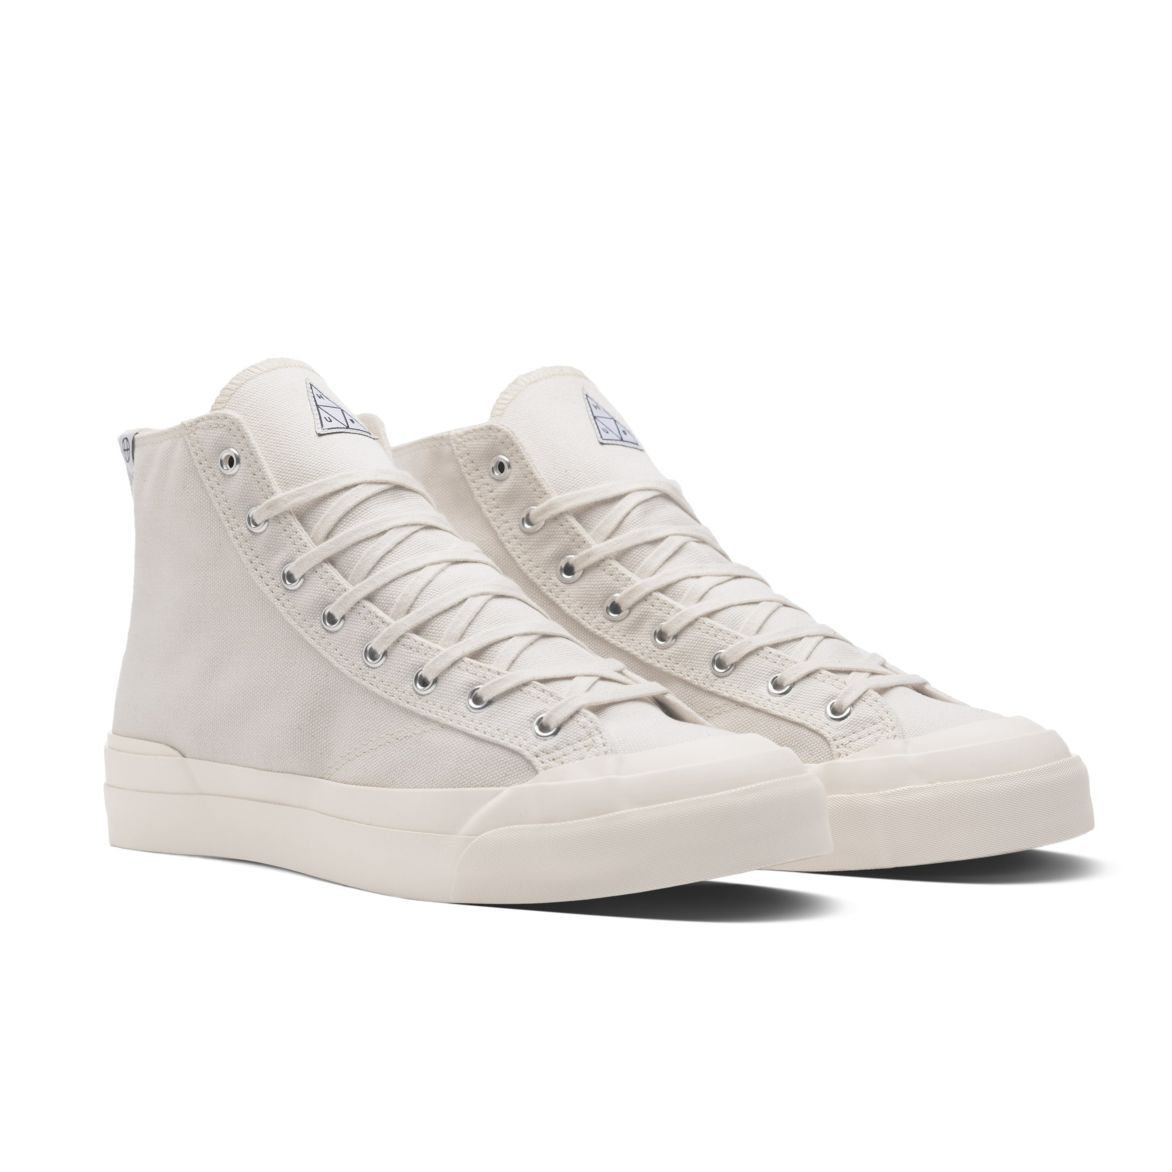 It’s on Sale: Moon-Star-made Sneakers from Huf – Put This On